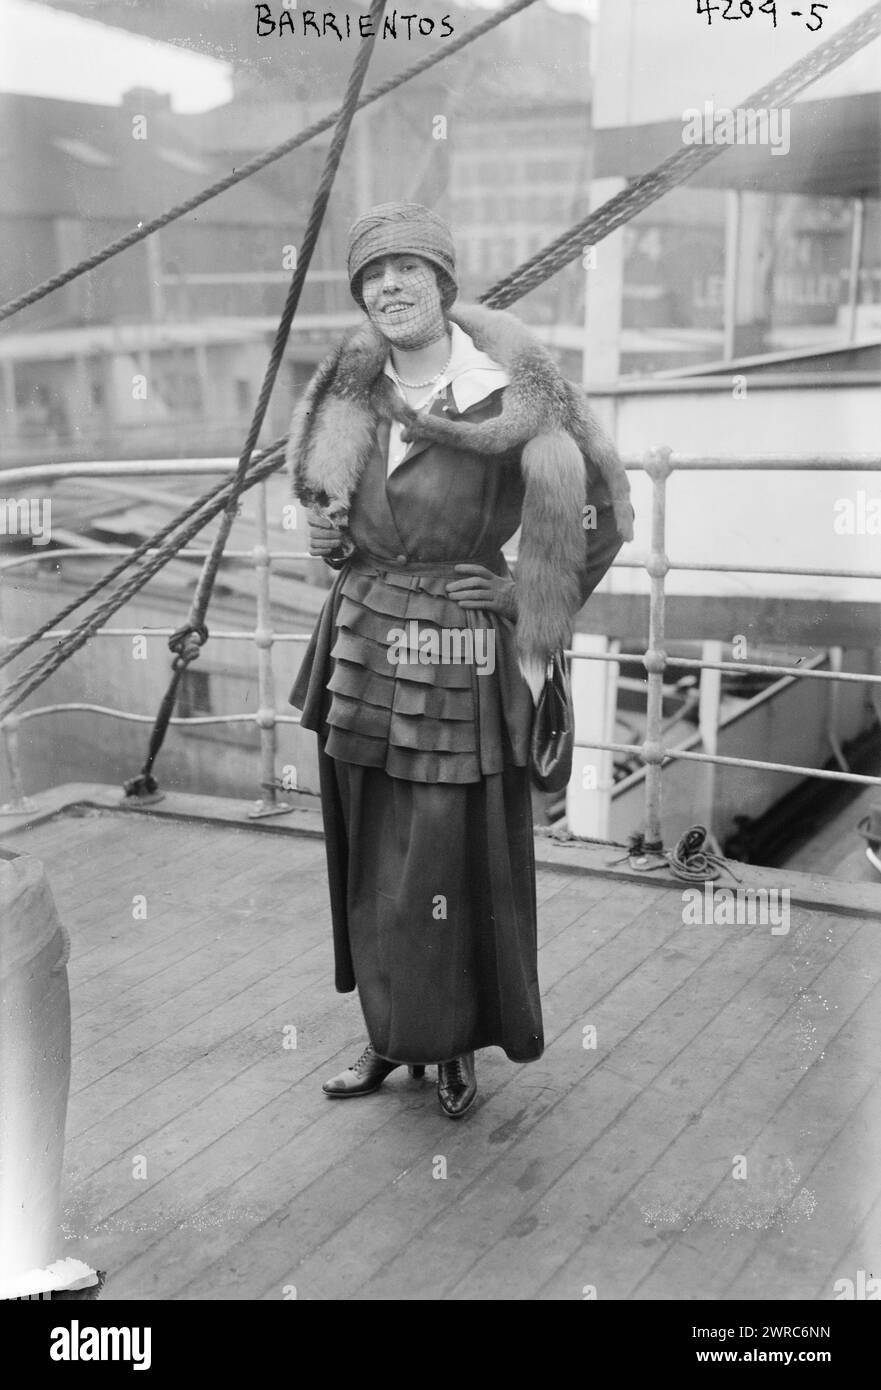 Barrientos, Photograph shows Spanish soprano opera singer Maria Barrientos (1883-1946) on board the Swedish liner Saga, bound for South America., 1917 May, Glass negatives, 1 negative: glass Stock Photo